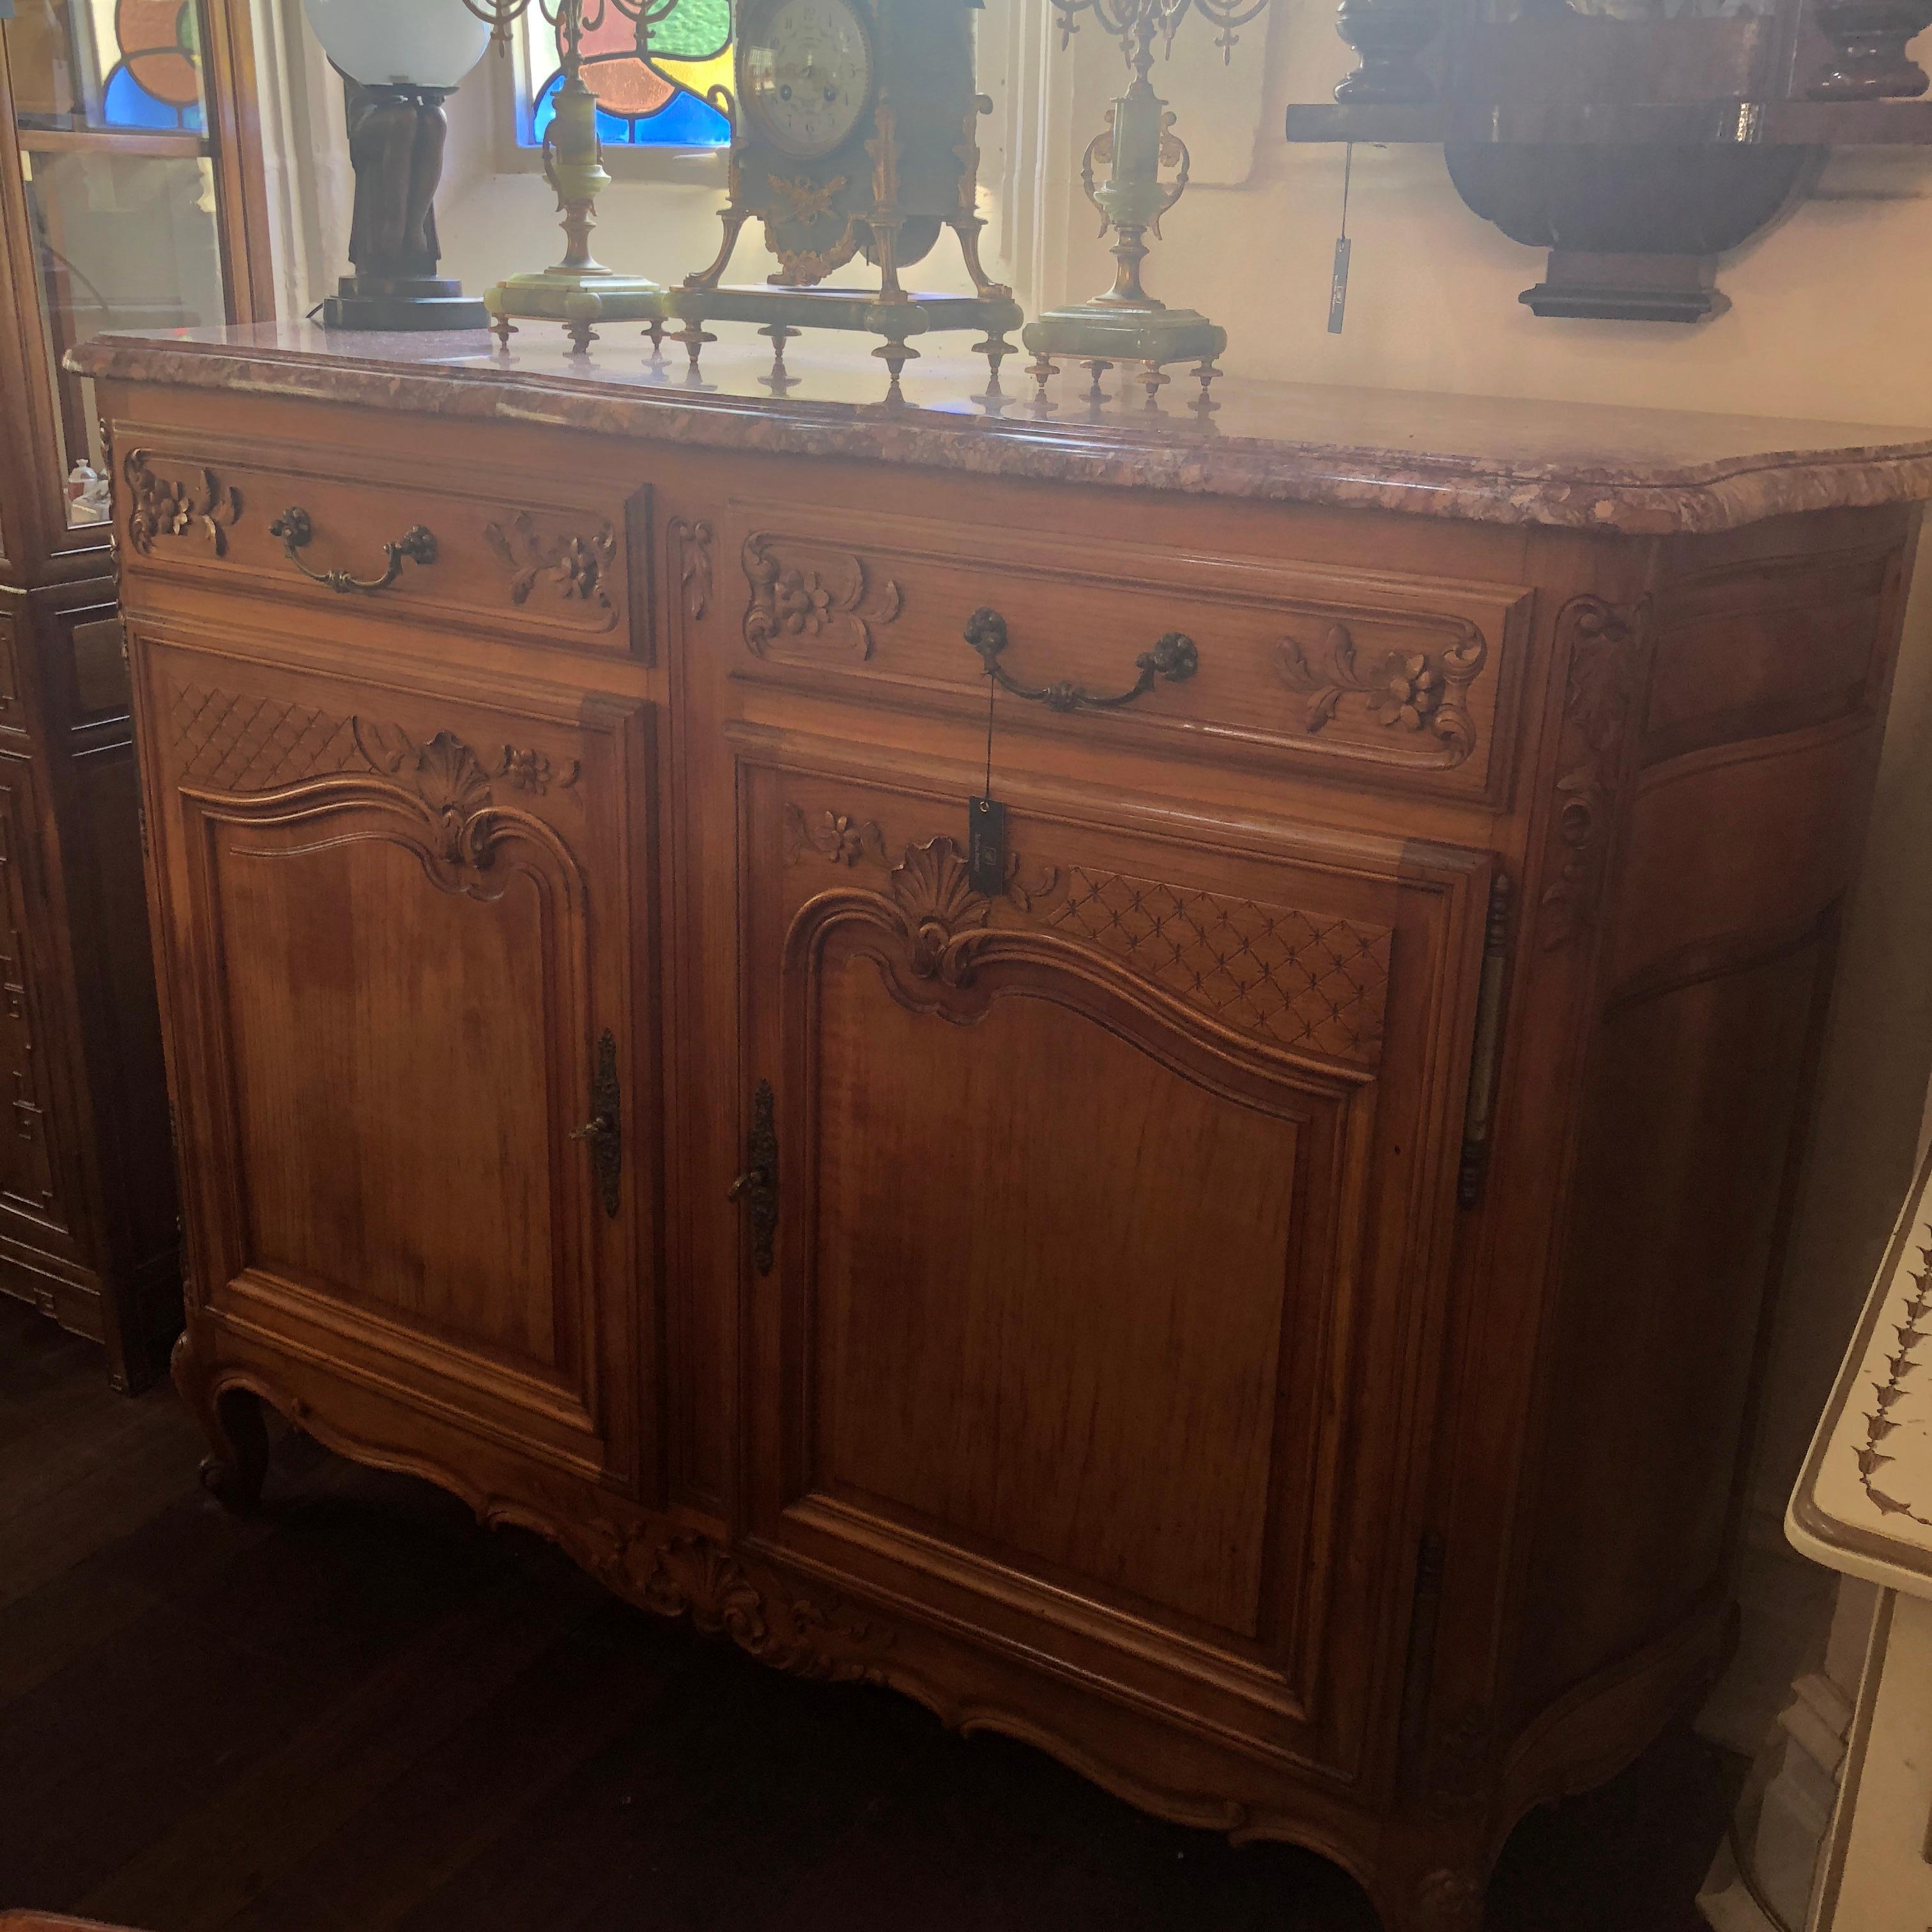 The most charming commode for the Province styled home, this delightful Louis XV carved commode, features a lovely ochre veined marble top and cherry wood body. Dated at approximately circa 1930, this piece features a distressed patina with cabriole